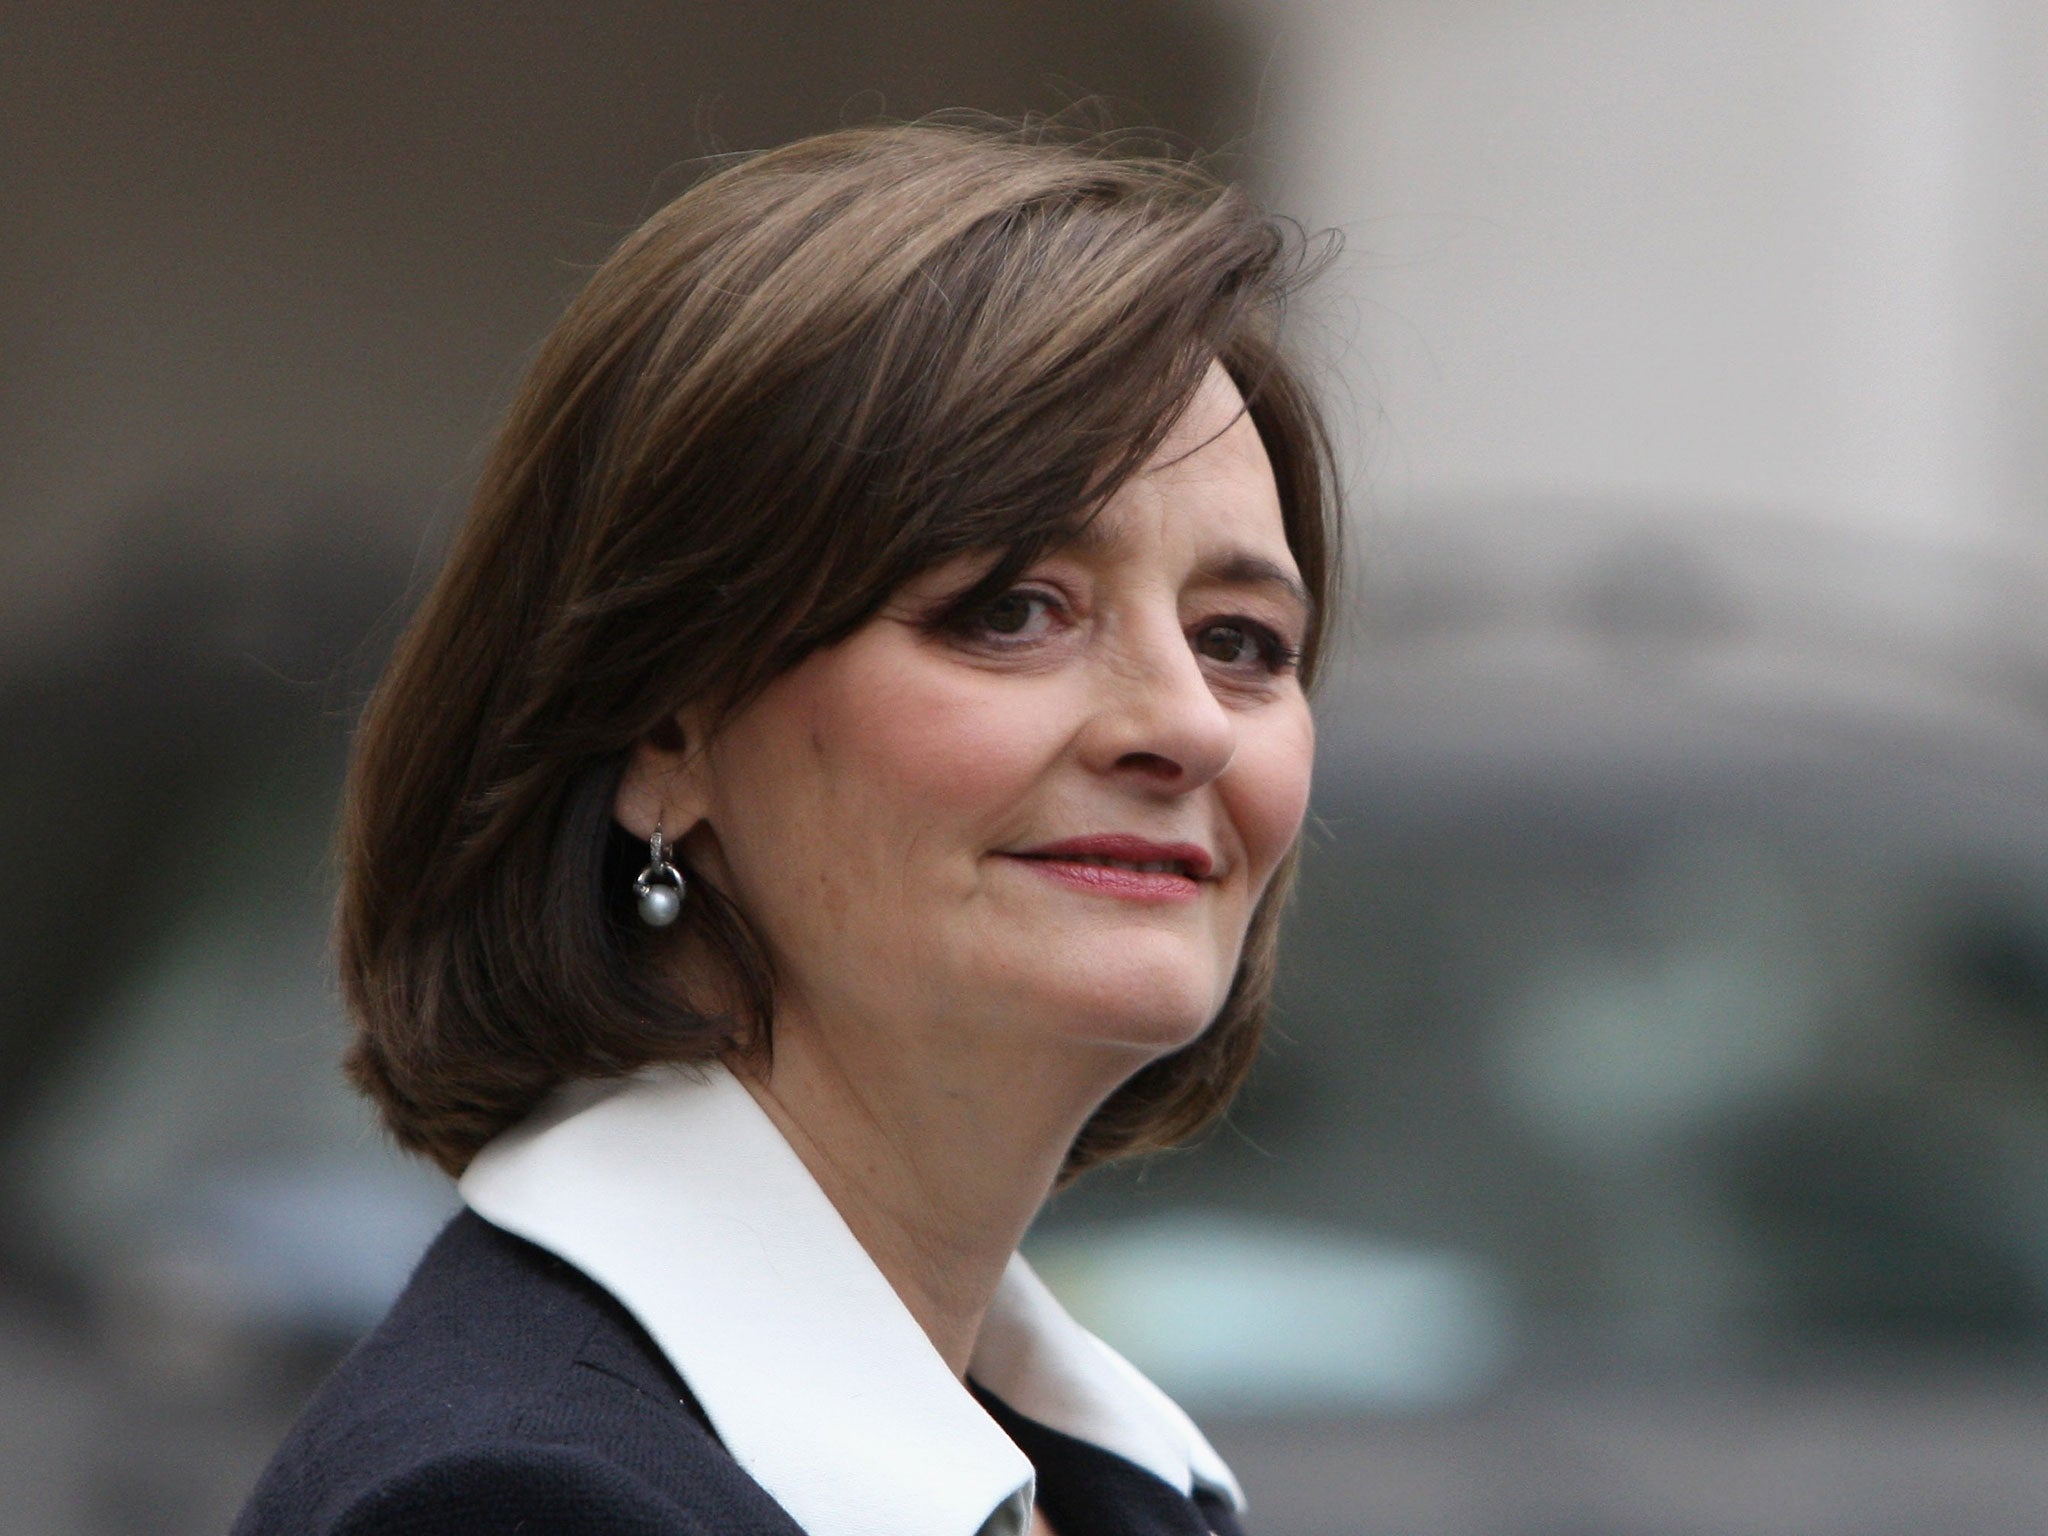 Cherie Blair says she is determined to achieve equality for women in the 21st century